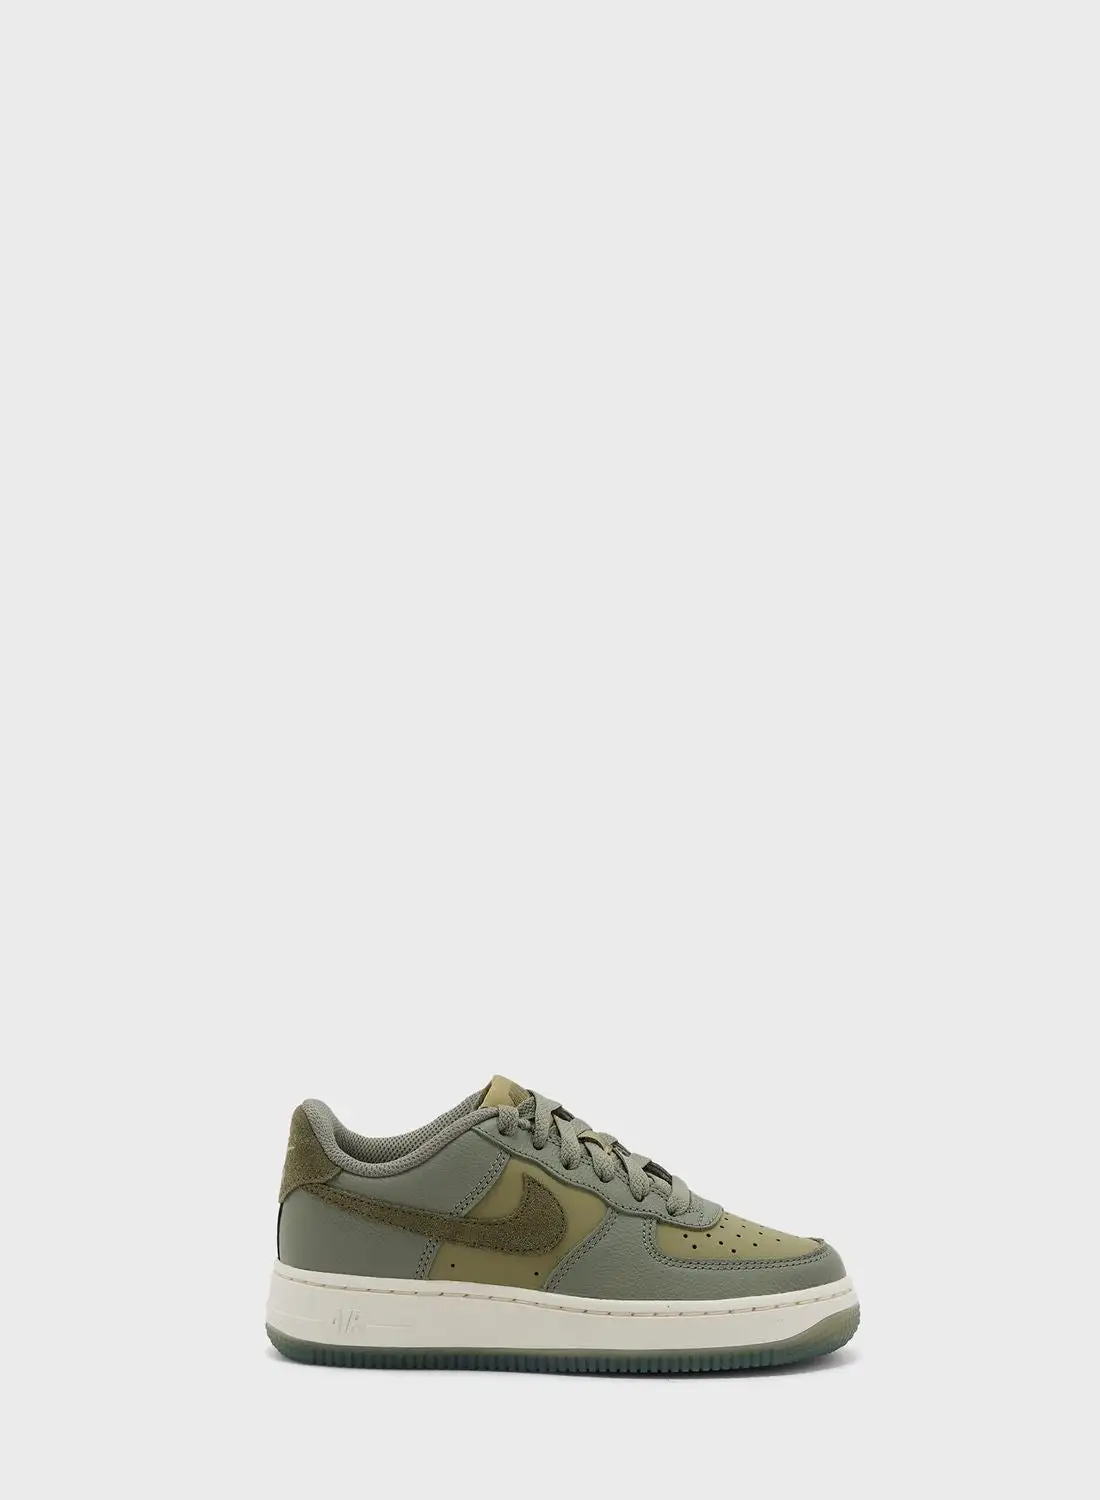 Nike Youth Air Force 1 Lv8 4